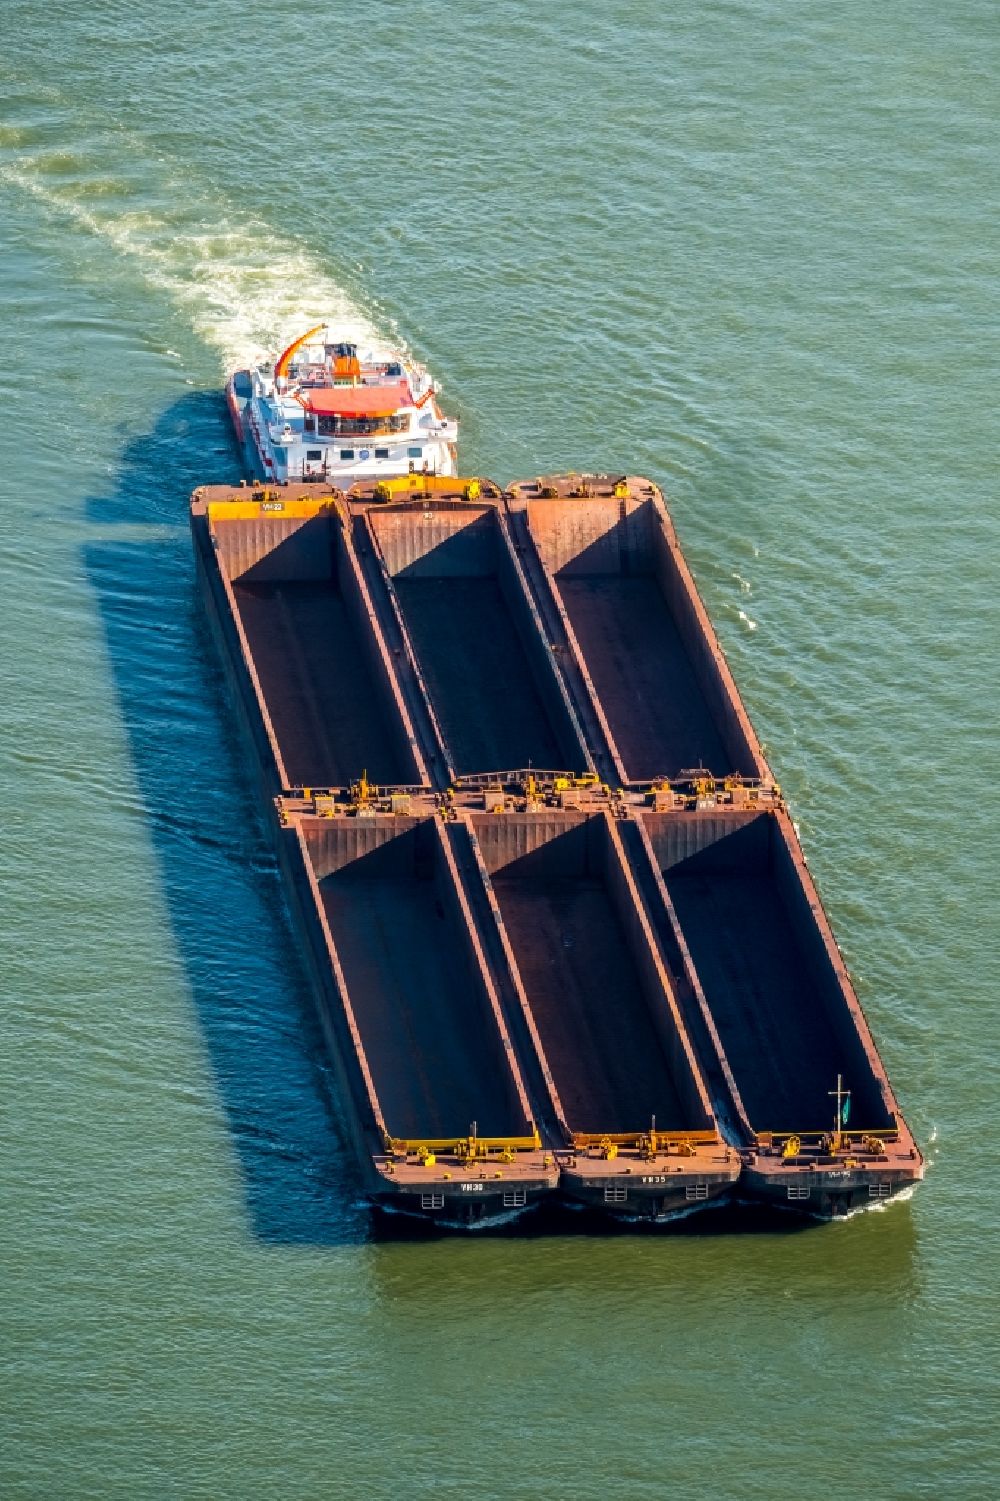 Xanten from the bird's eye view: Cargo ships and bulk carriers on the inland shipping waterway of the river course of the Rhine river in Xanten in the state North Rhine-Westphalia, Germany